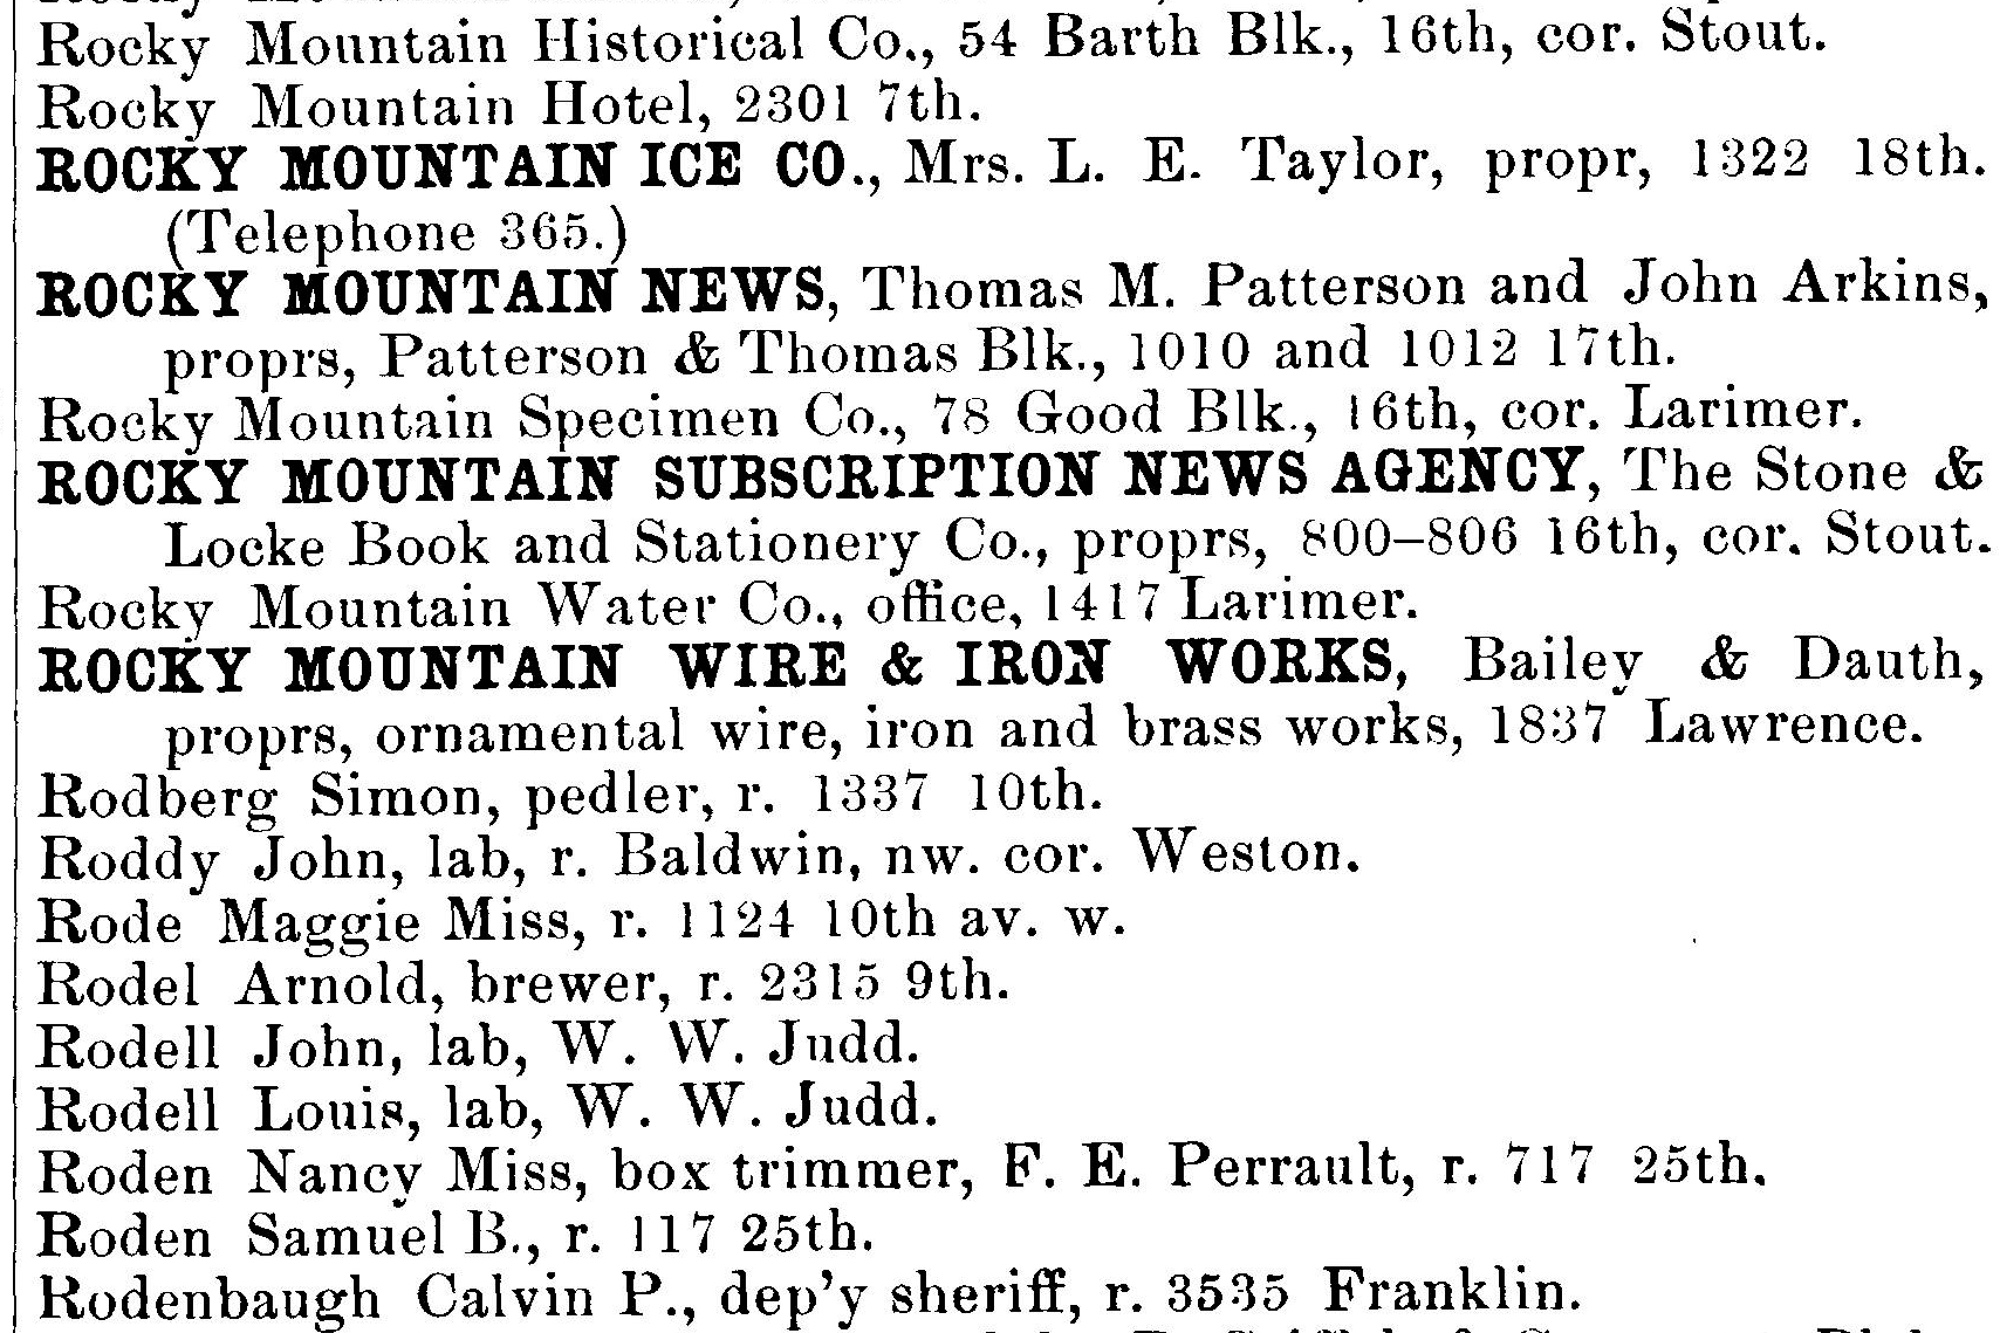 Dauth Family Archive - 1891 - Denver Directory - Entry For Rocky Mountain Wire and Iron Works